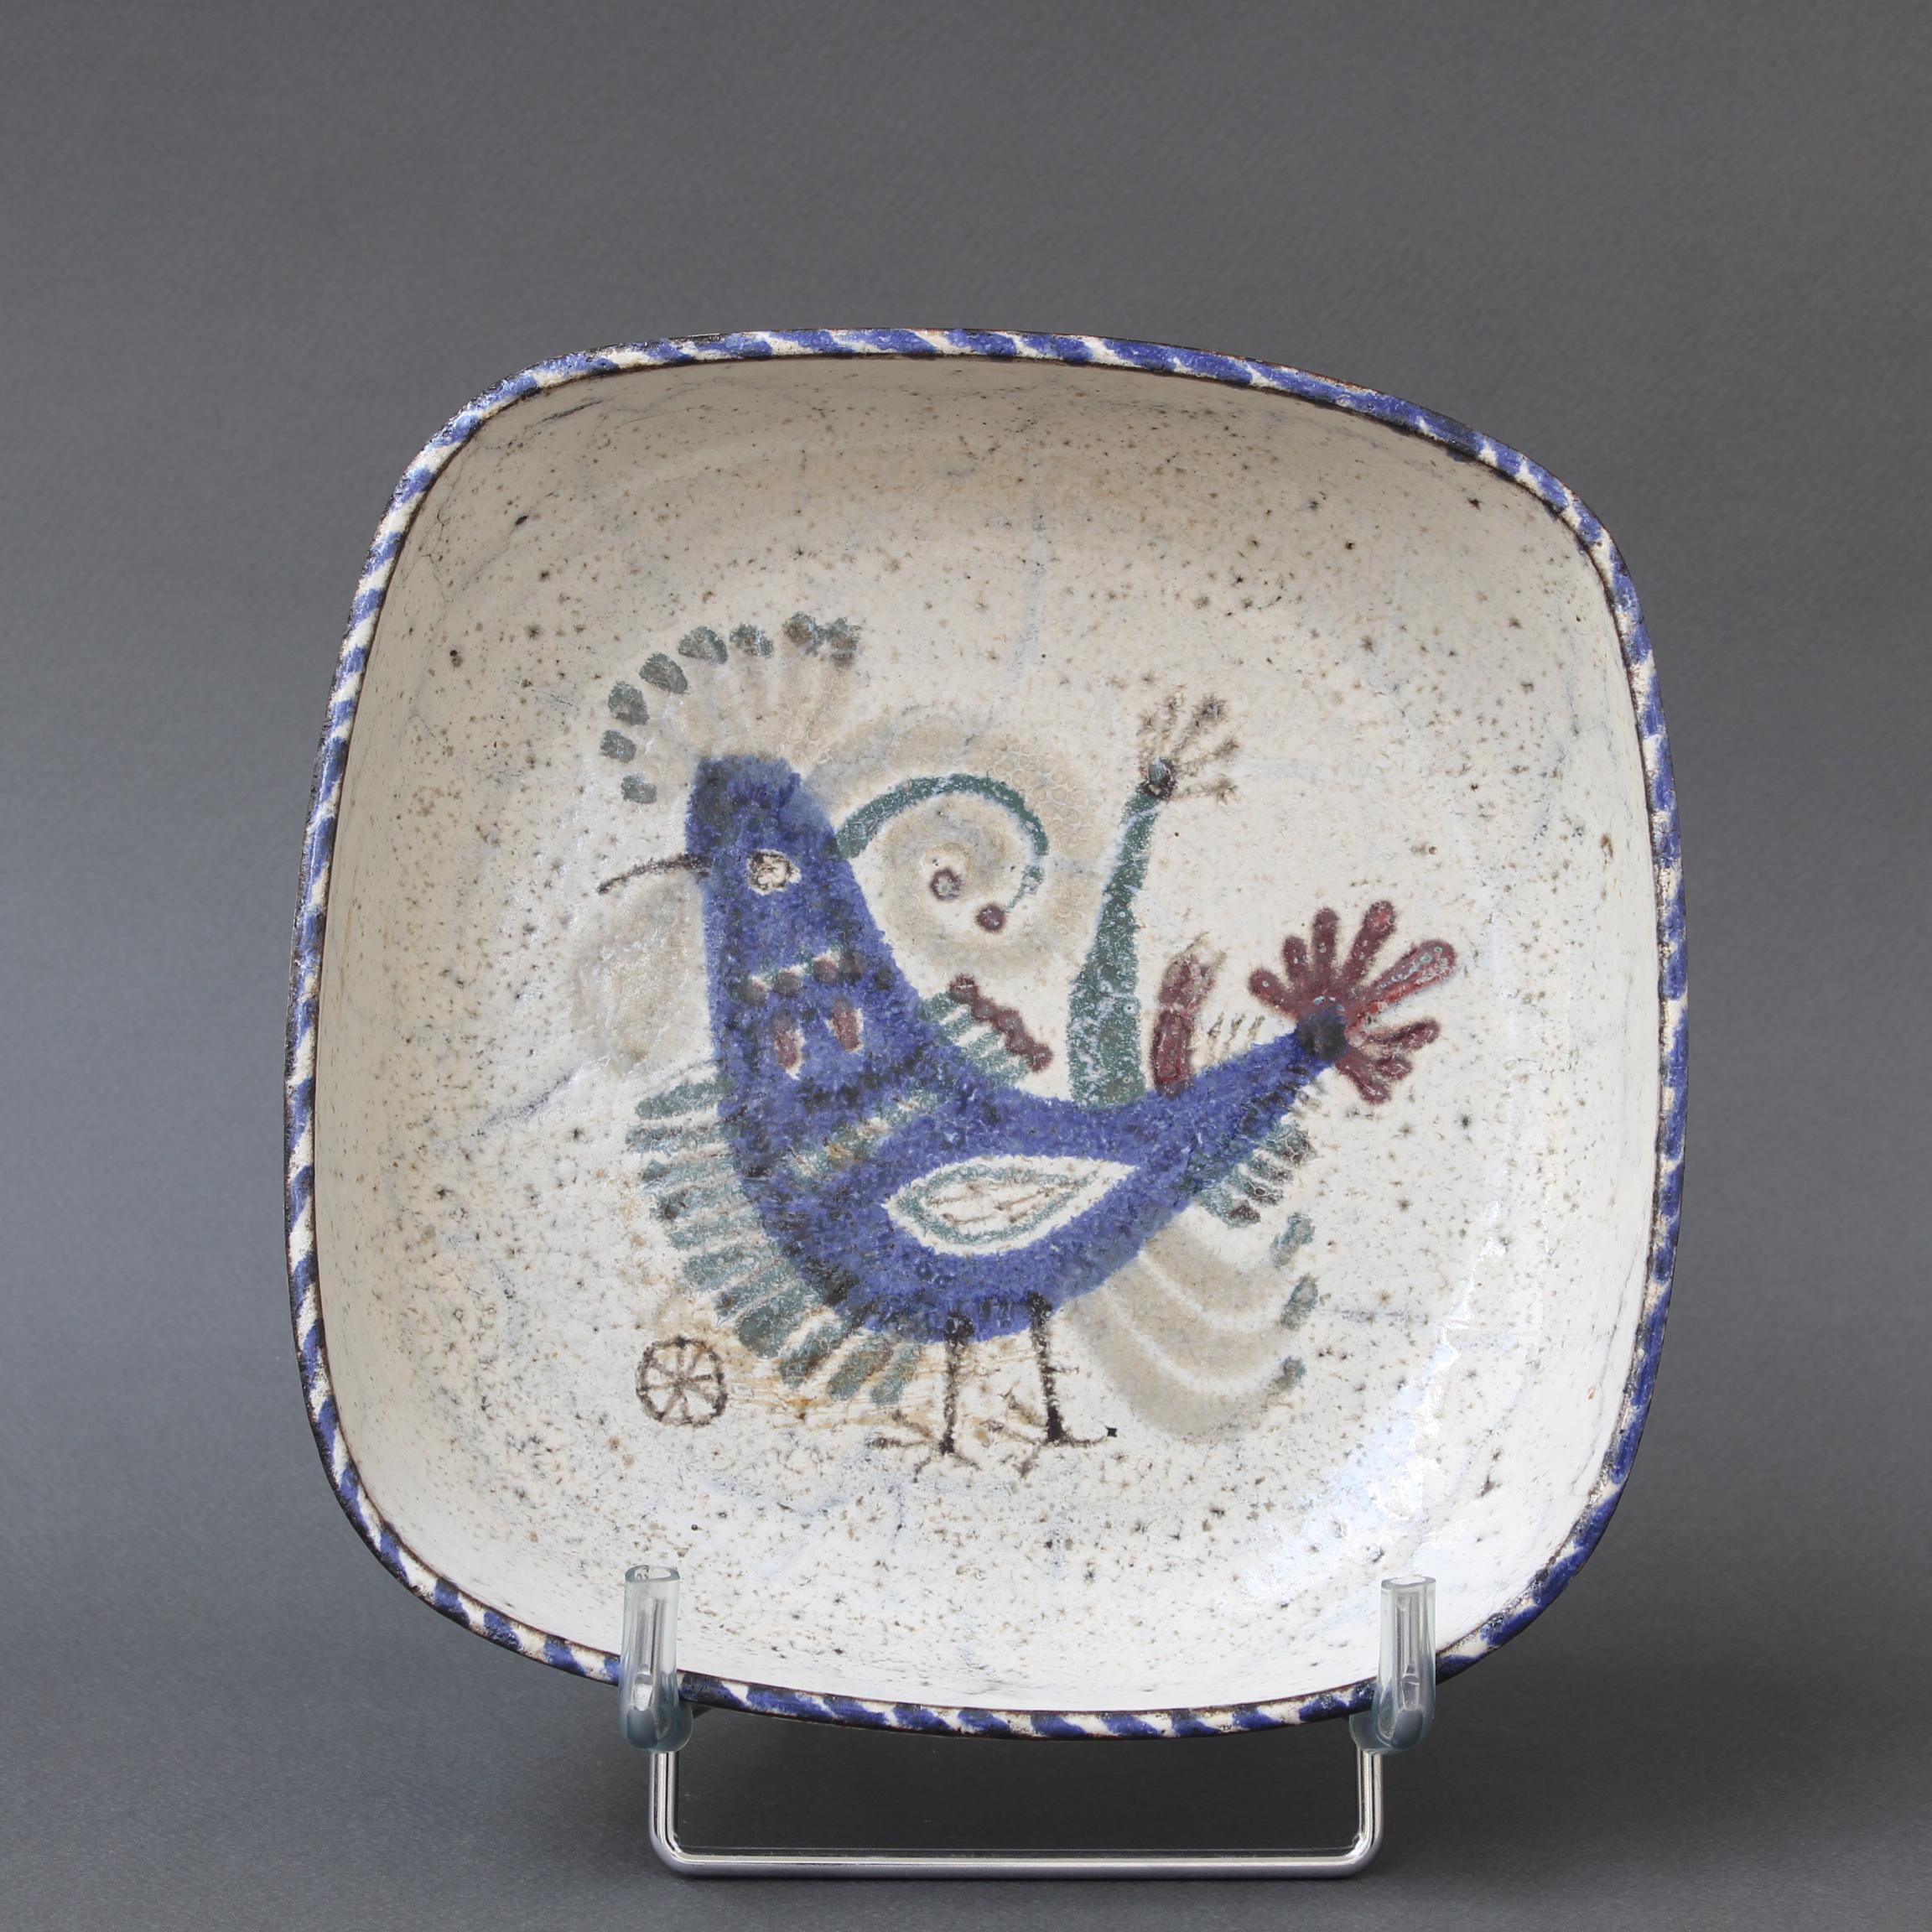 Vintage French decorative ceramic bowl by Le Mûrier (circa 1960s). Square-shaped ceramic piece with rounded corners make for a delightfully rustic bit of Provence. A French coq motif is hand painted at the centre recess in one of Le Mûrier's